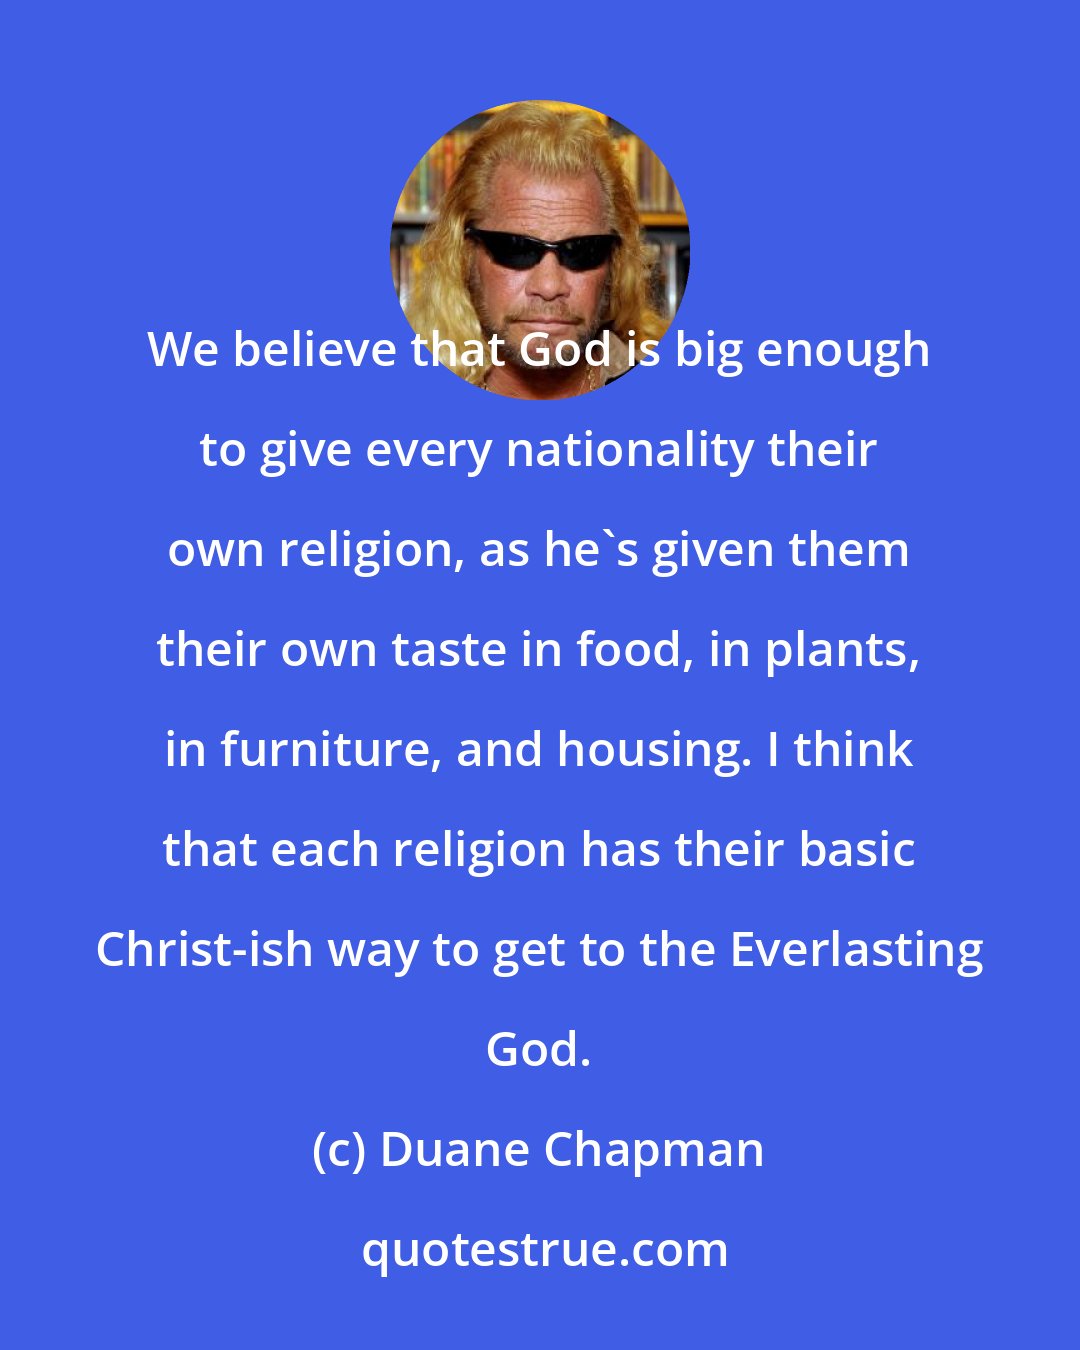 Duane Chapman: We believe that God is big enough to give every nationality their own religion, as he's given them their own taste in food, in plants, in furniture, and housing. I think that each religion has their basic Christ-ish way to get to the Everlasting God.